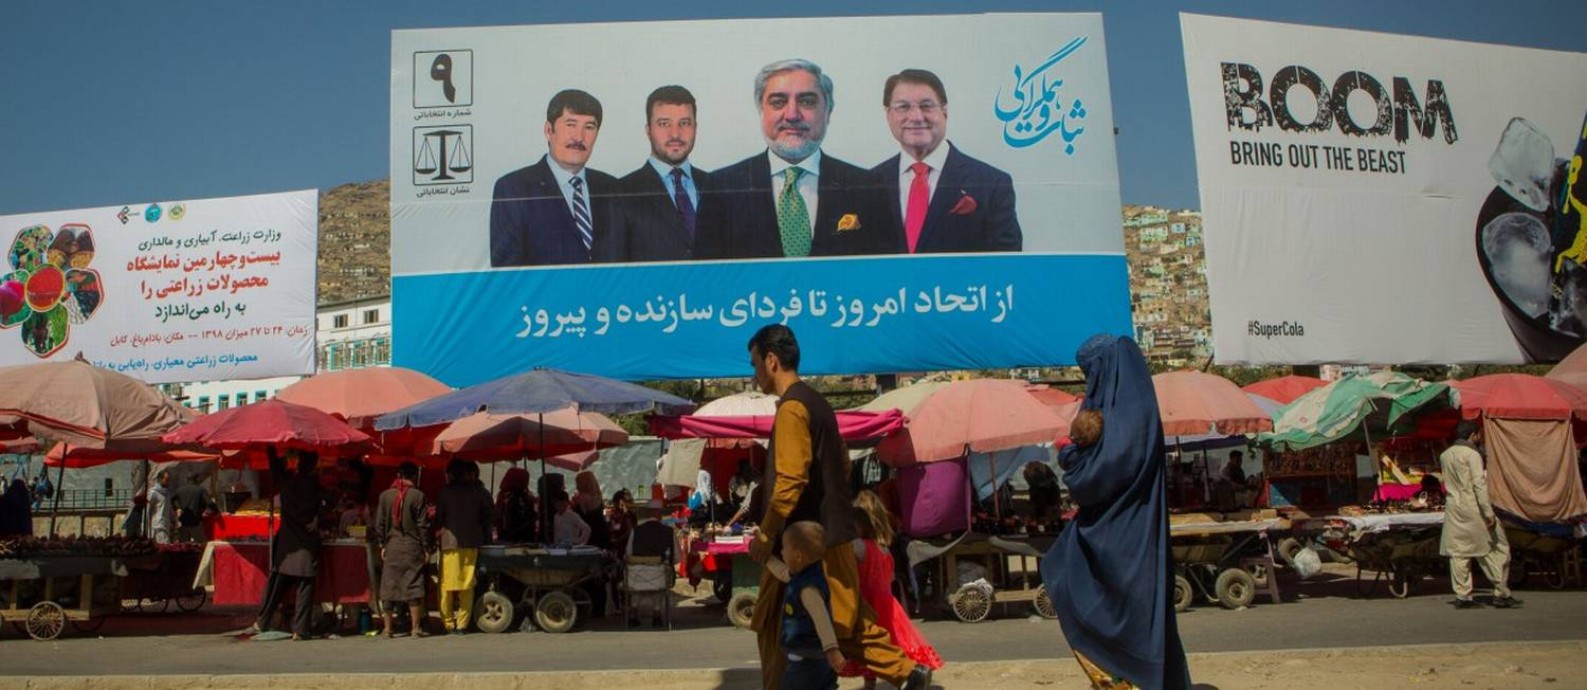 Kabul (Afghanistan) -19/09/2019) - An Afghan family walks by an election propaganda of Abdullah Abdullah, the main adversary of the Afghan President Ashraf Ghani in the upcoming elections